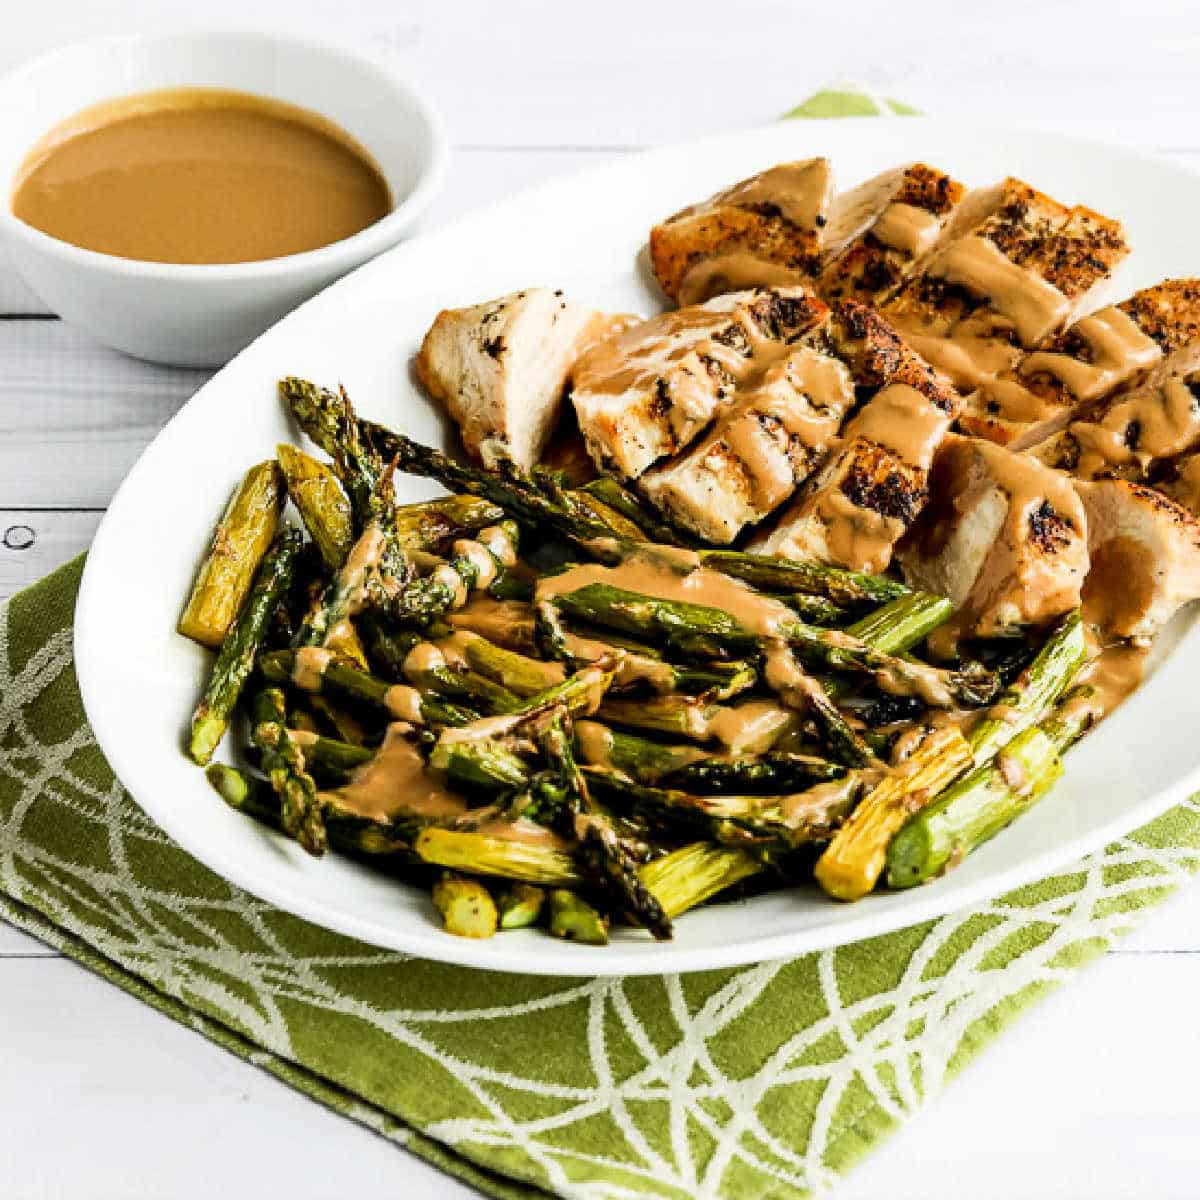 Chicken and Roasted Asparagus with Tahini Sauce (Video)